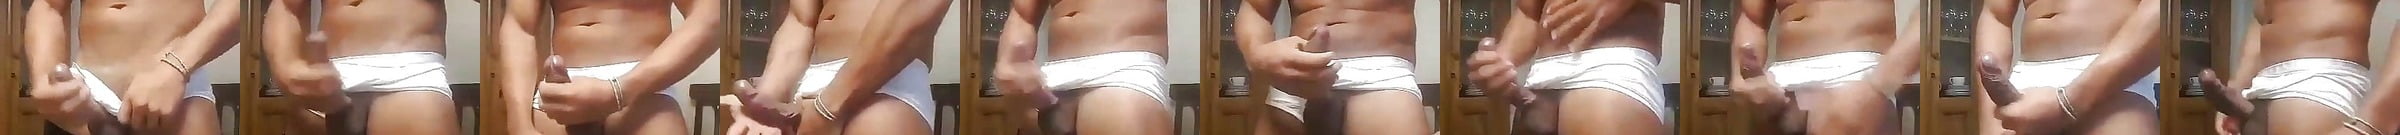 Featured Papito Gay Porn Videos Xhamster